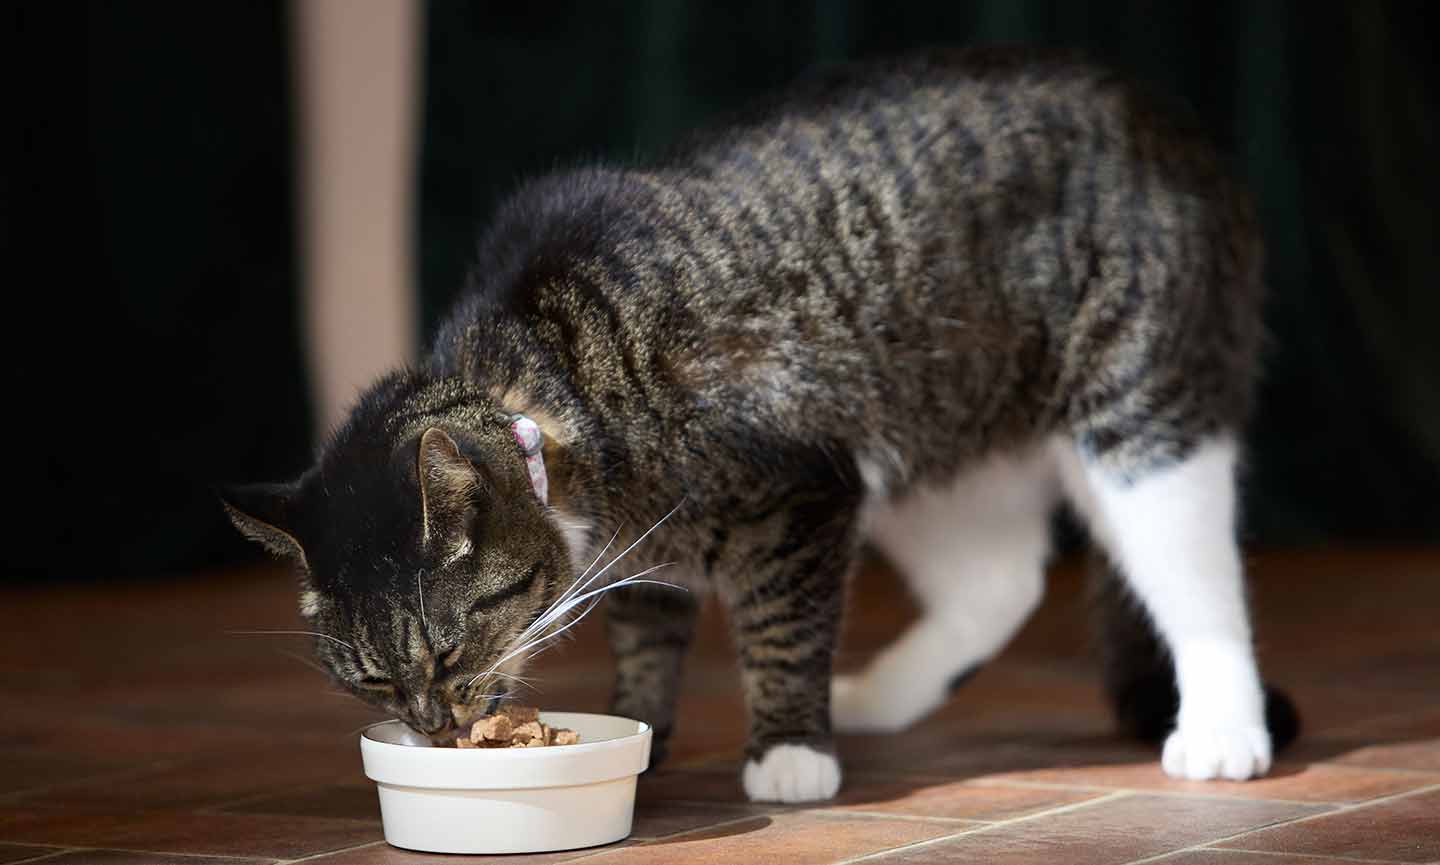 a cat eating food from a bowl